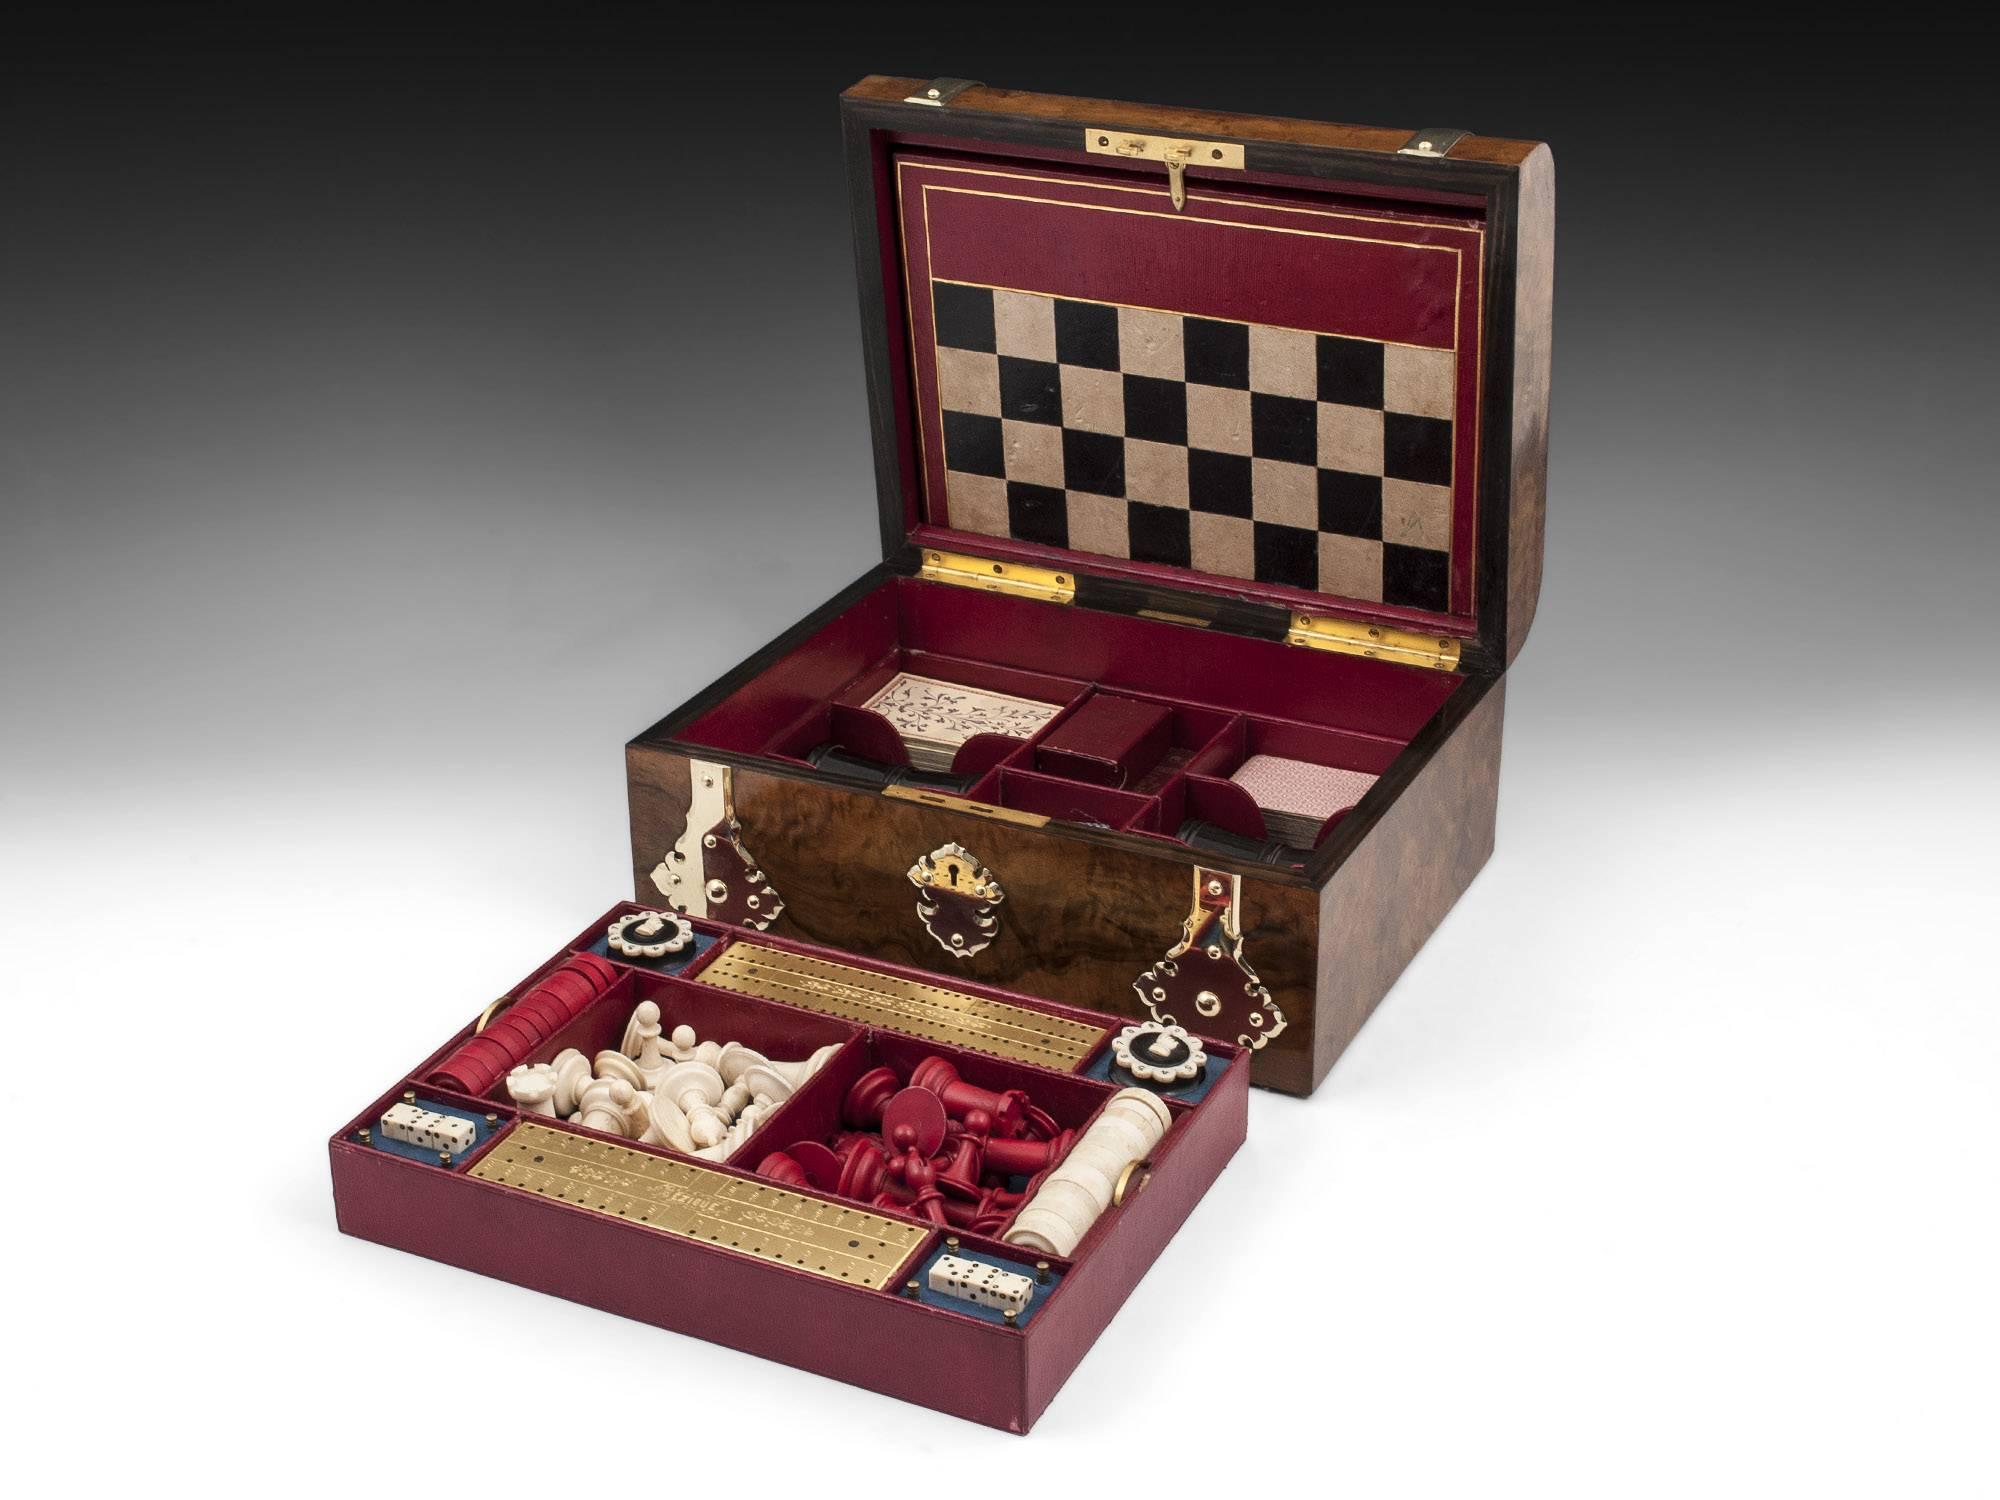 Wood Antique Backgammon Chess Games Compendium Poker Box with Ornate Brasswork For Sale